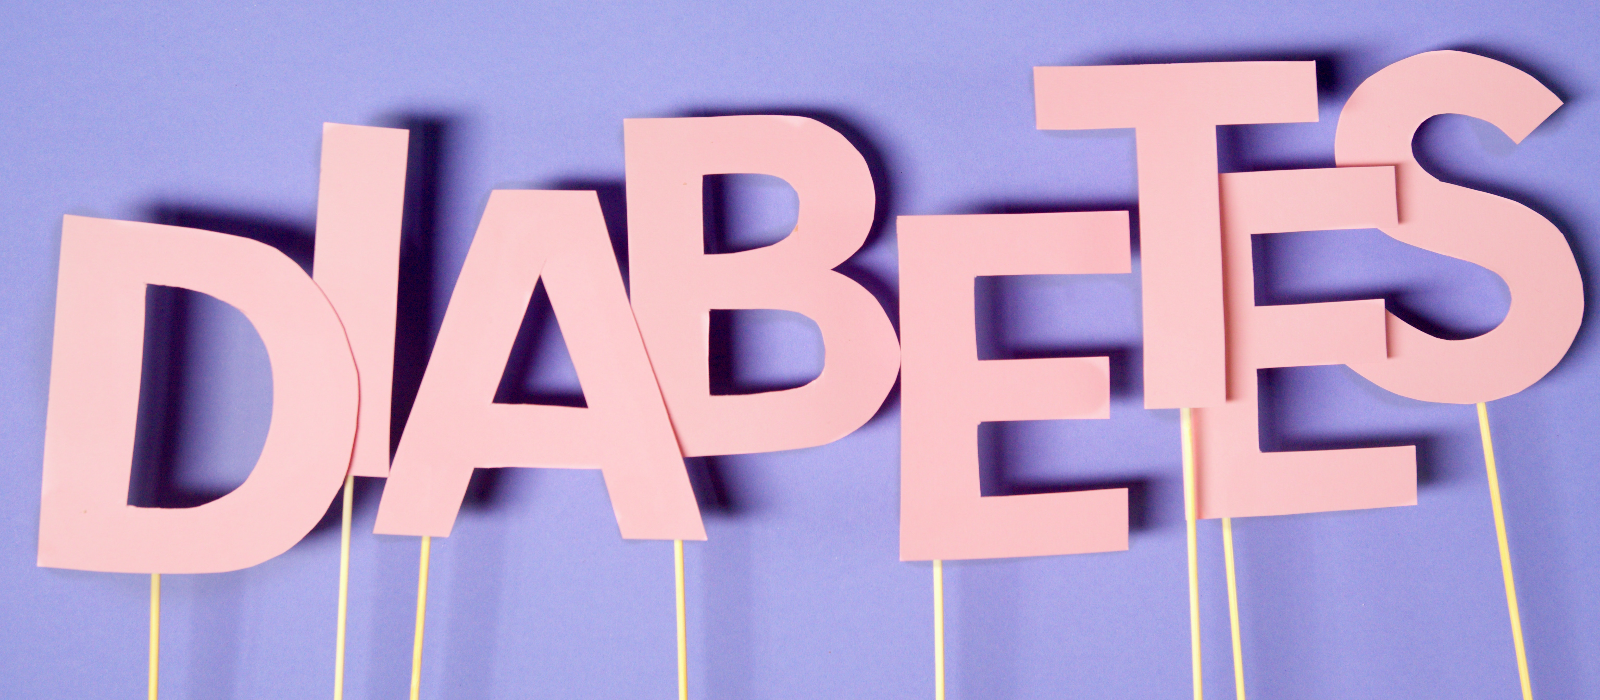 The word "diabetes" is spelled out on paper letters held on thin sticks.